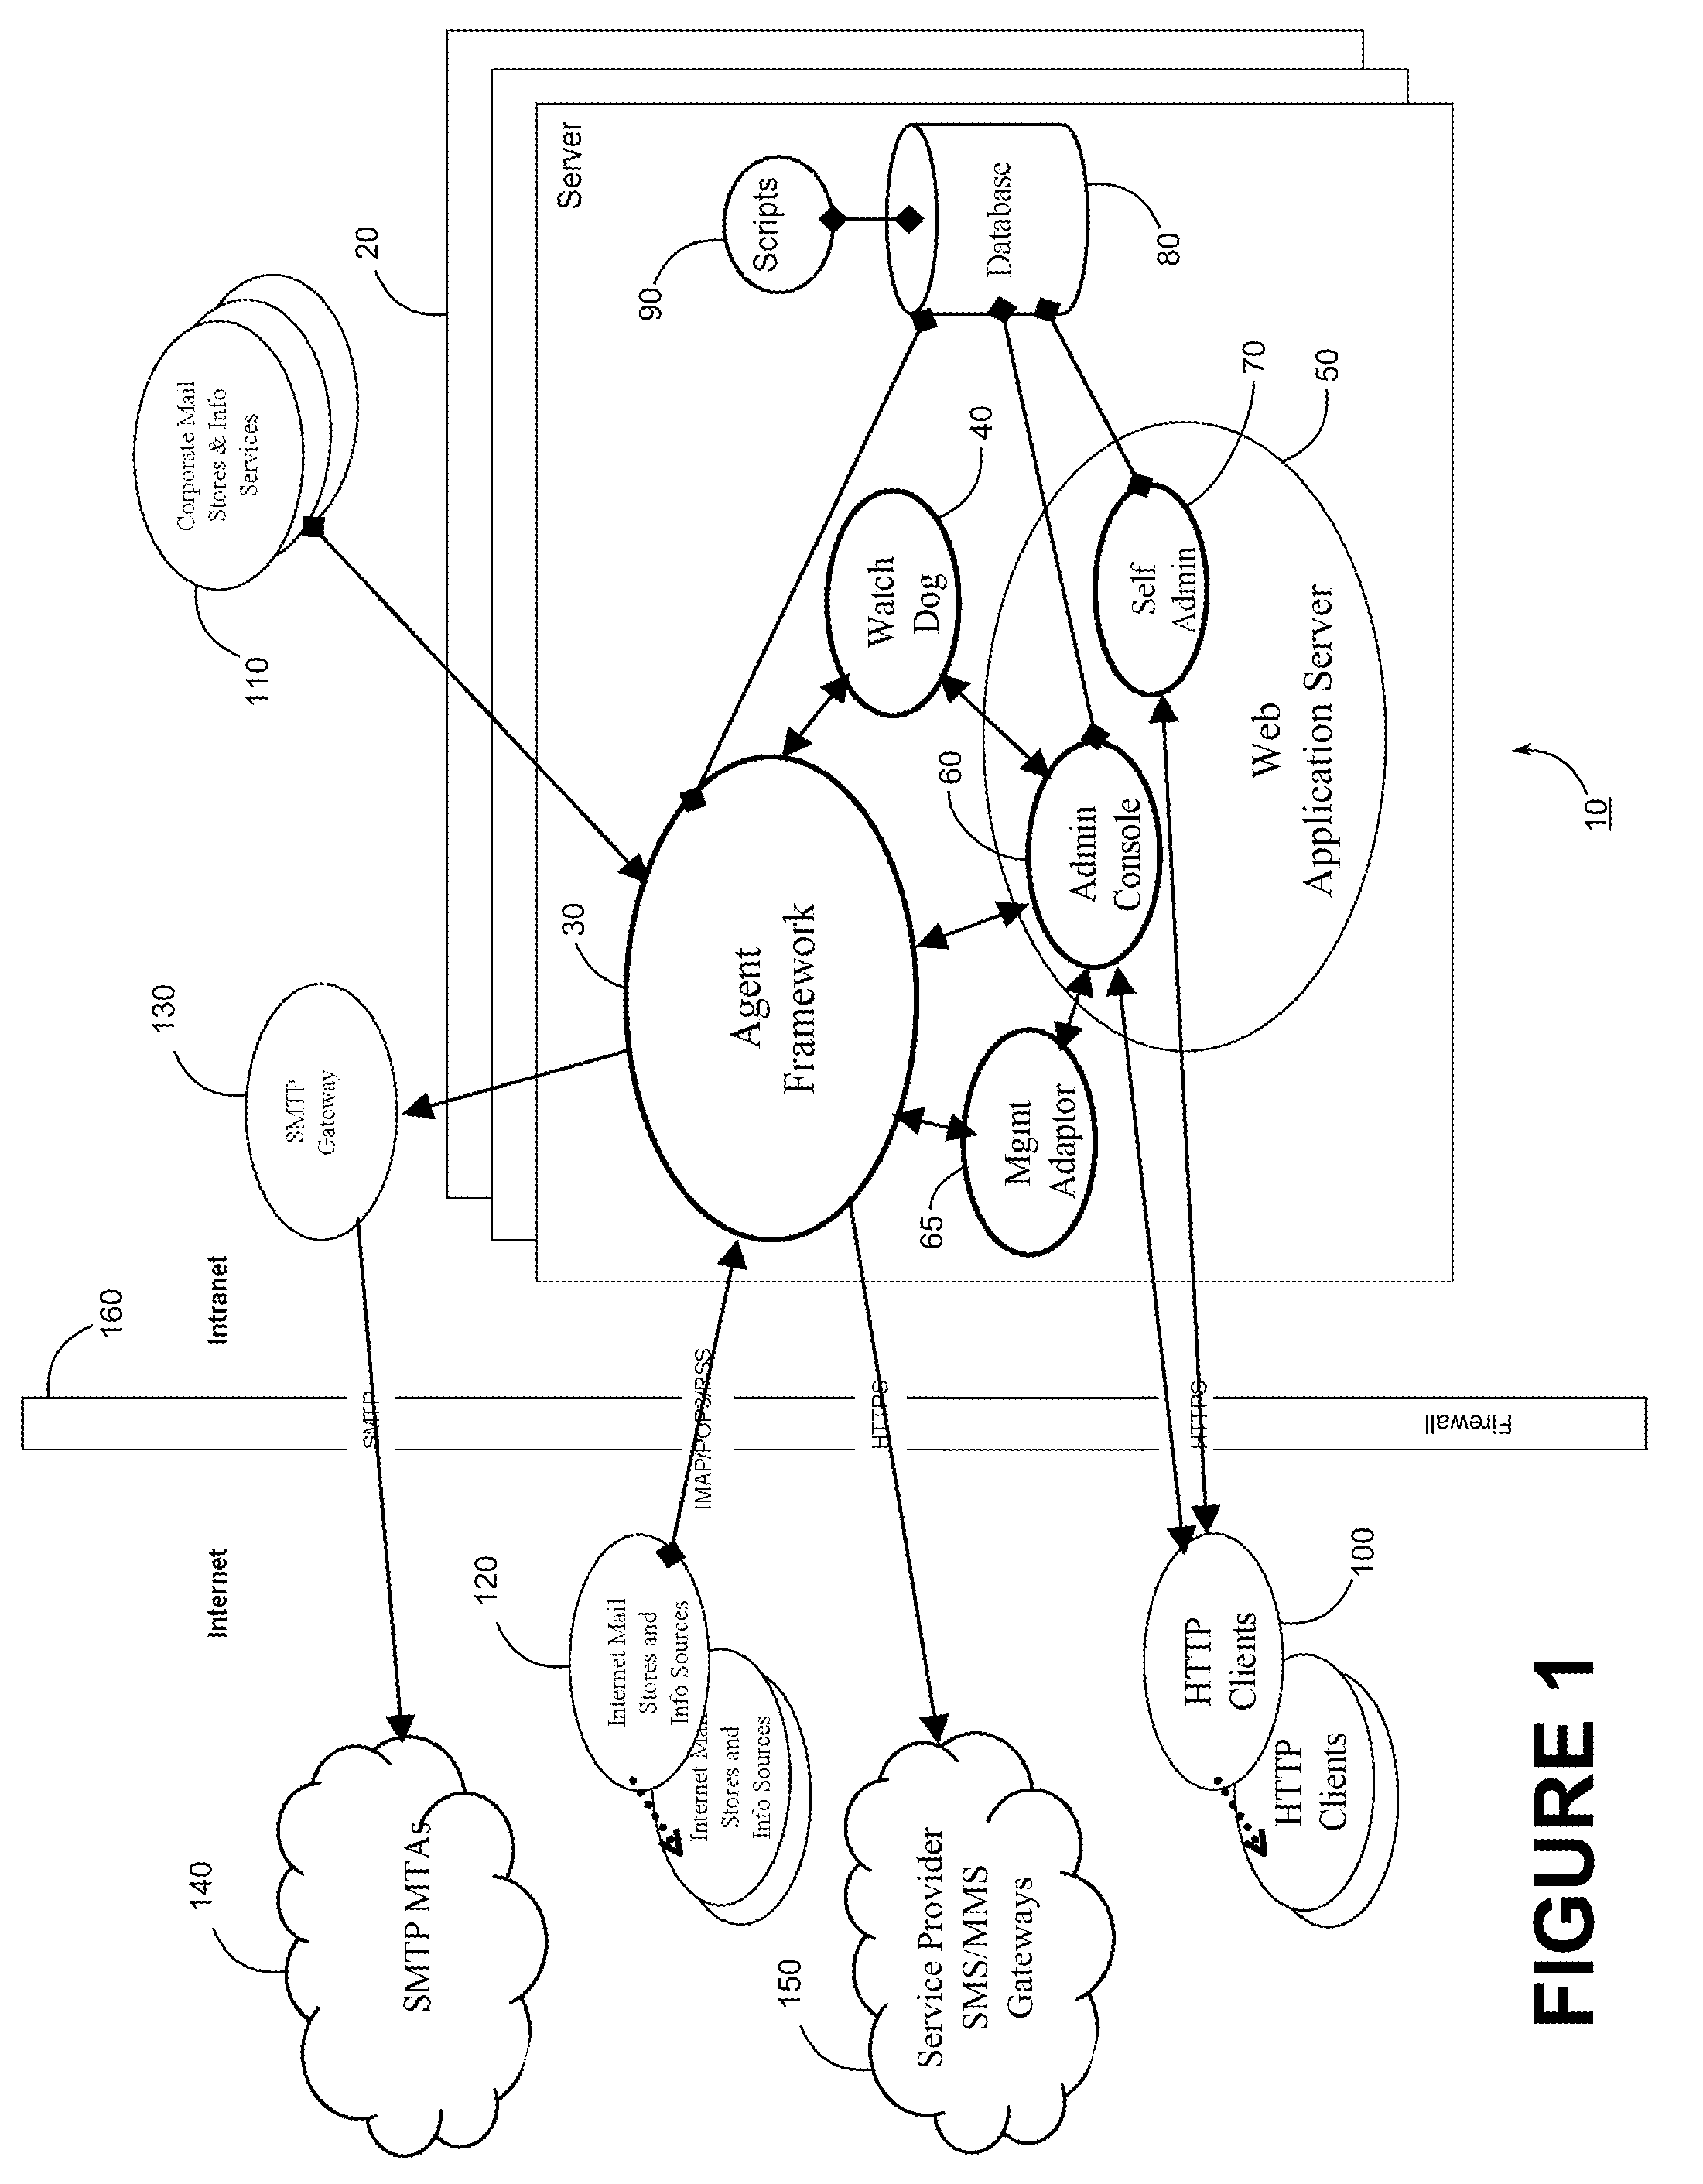 Processing of network content and services for mobile or fixed devices